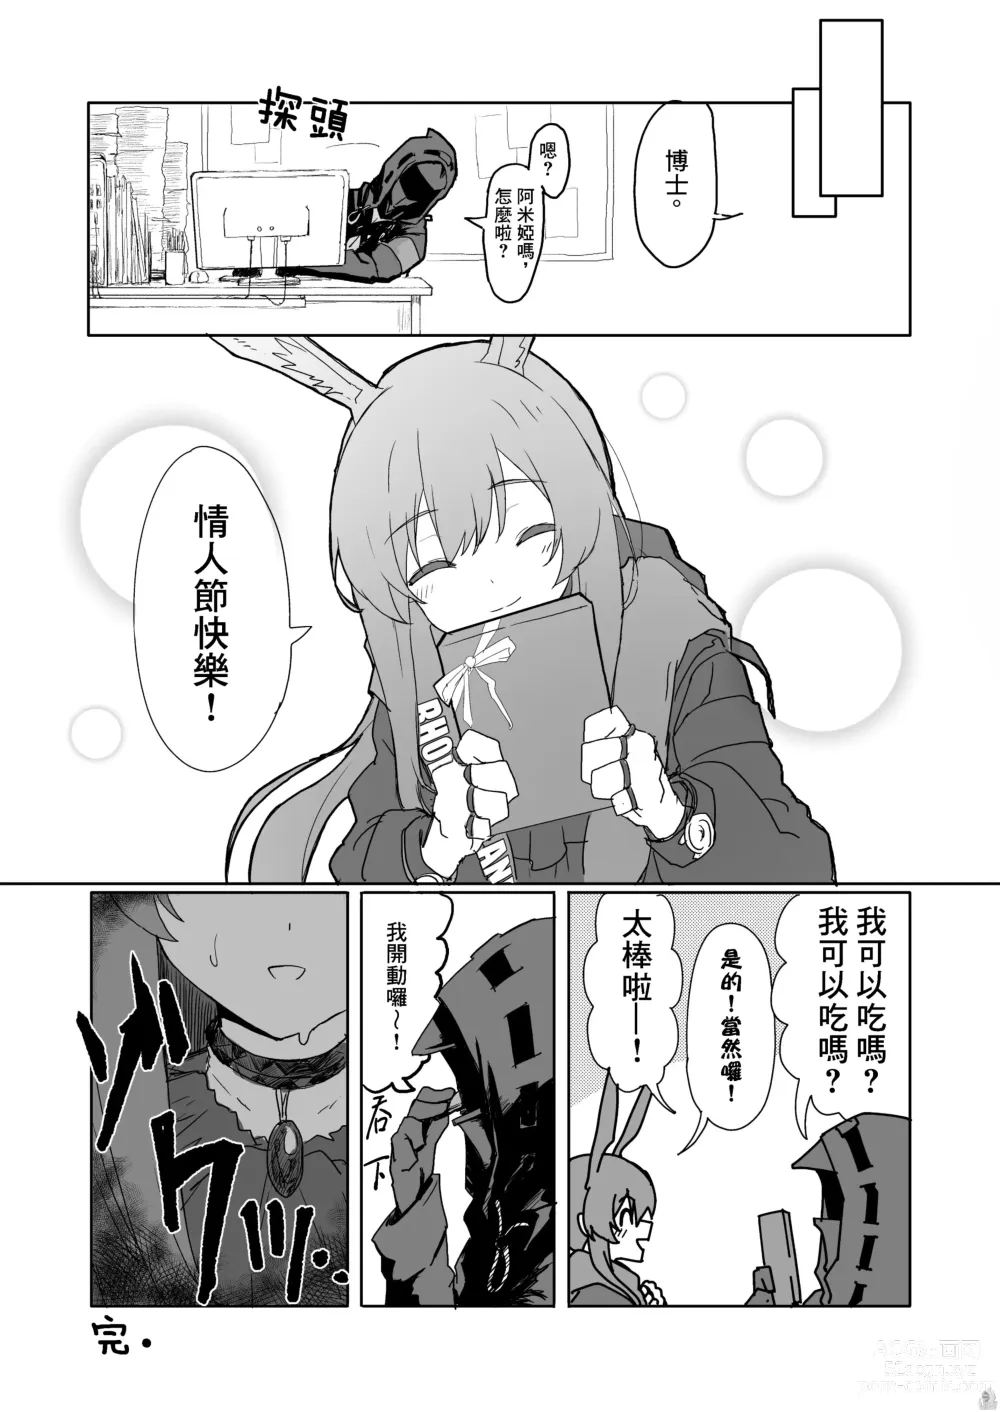 Page 21 of doujinshi Twitter collection